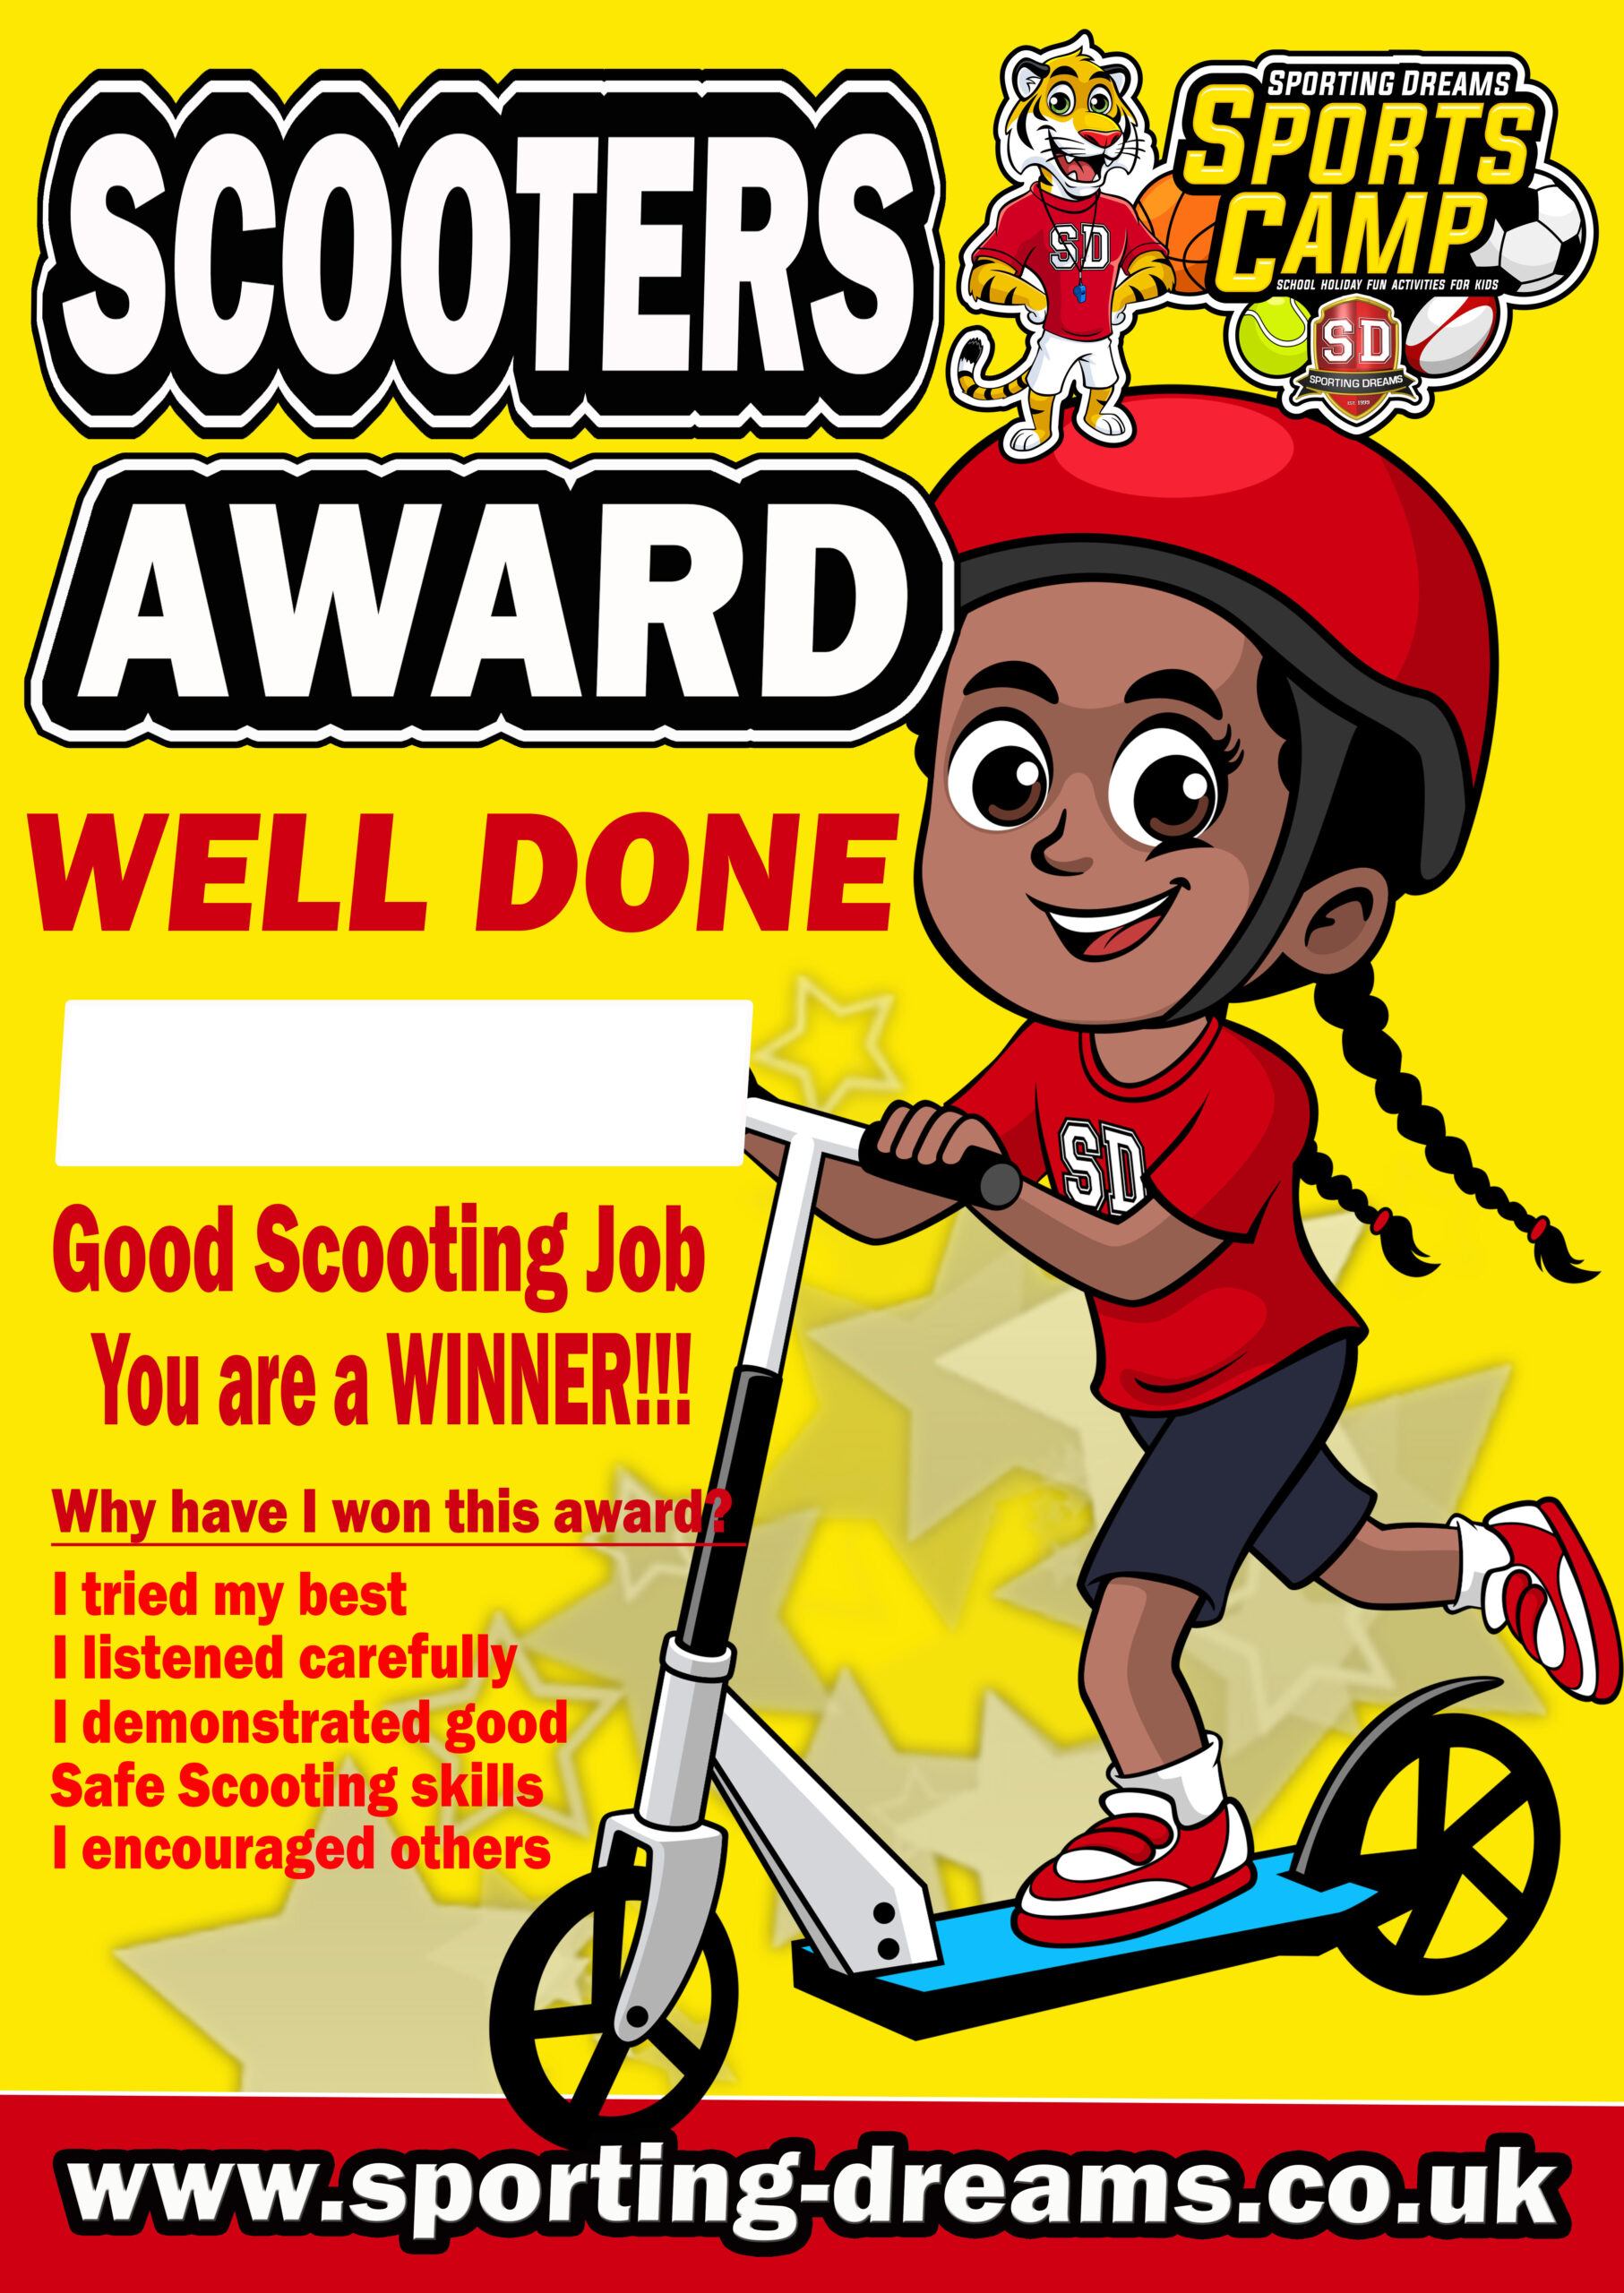 Sporting Dreams School Holiday Sports Camps. Scooters Award